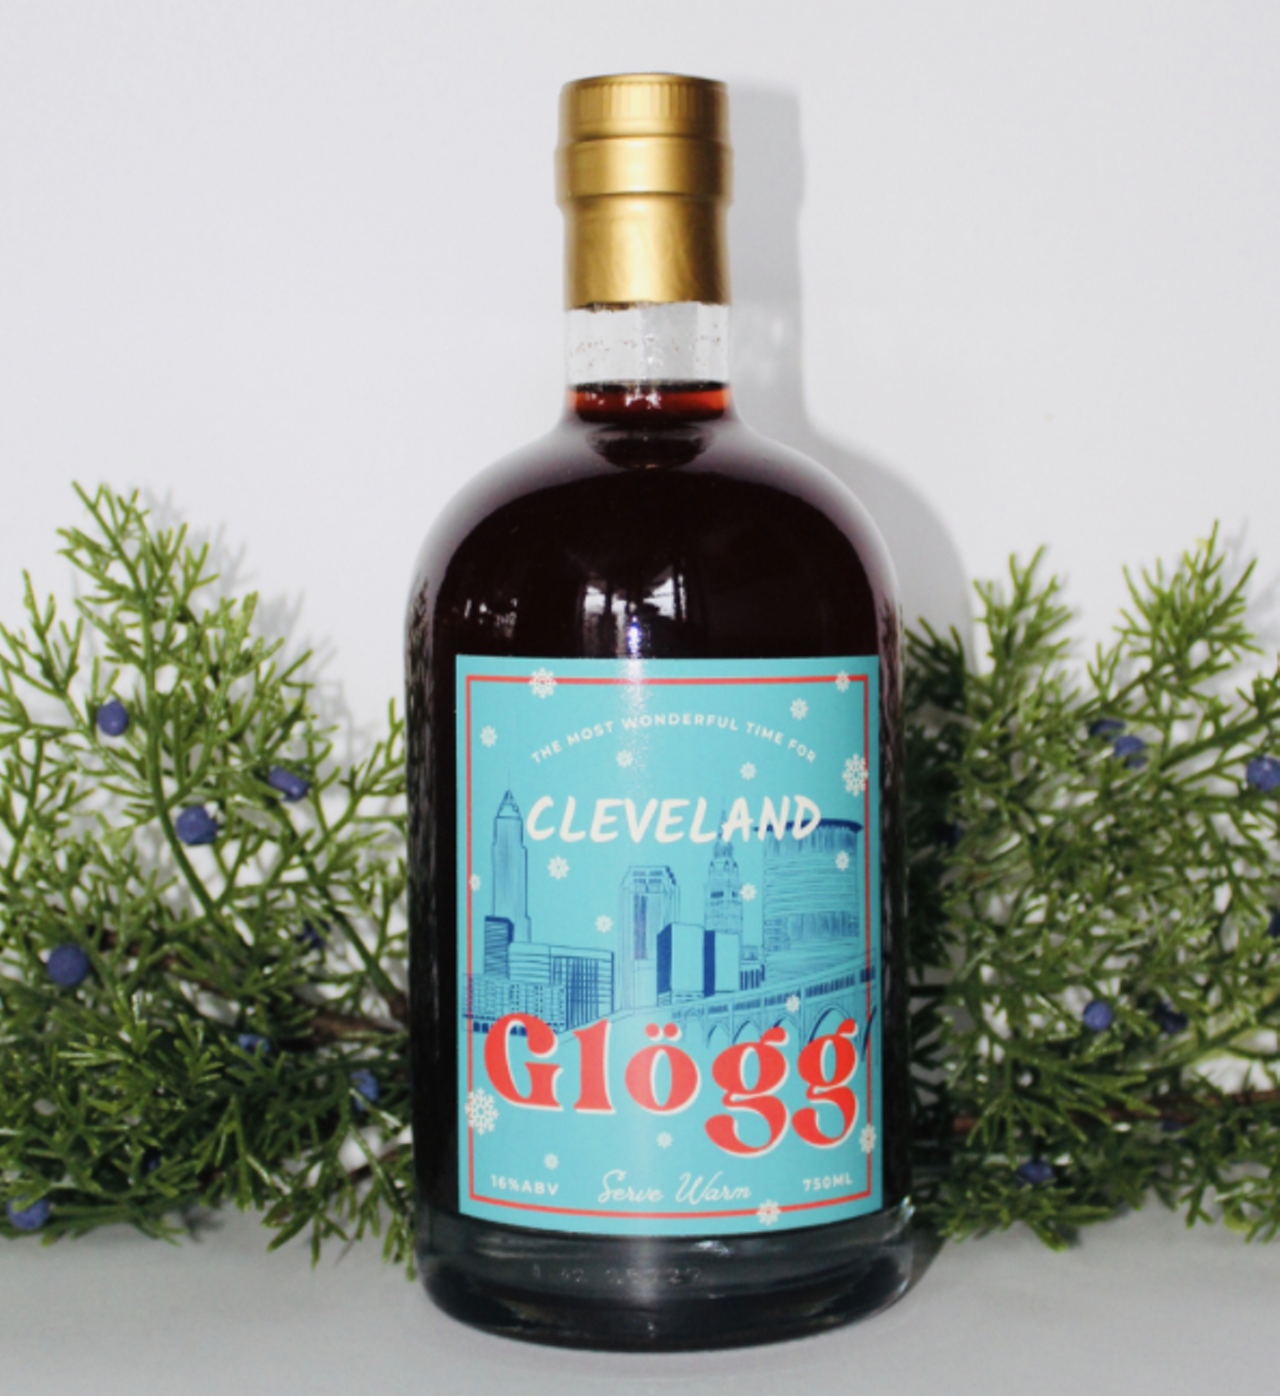 Cleveland Glogg The three sisters who own StoneWater Golf Club sell this drink that has a history dating back 500 years and was first served in Cleveland at Simon's Tavern in 1934. Glogg is a Swedish mulled wine made with cinnamon, raisins, sugar, cloves, orange peel and more that is perfect for drinking at parties.